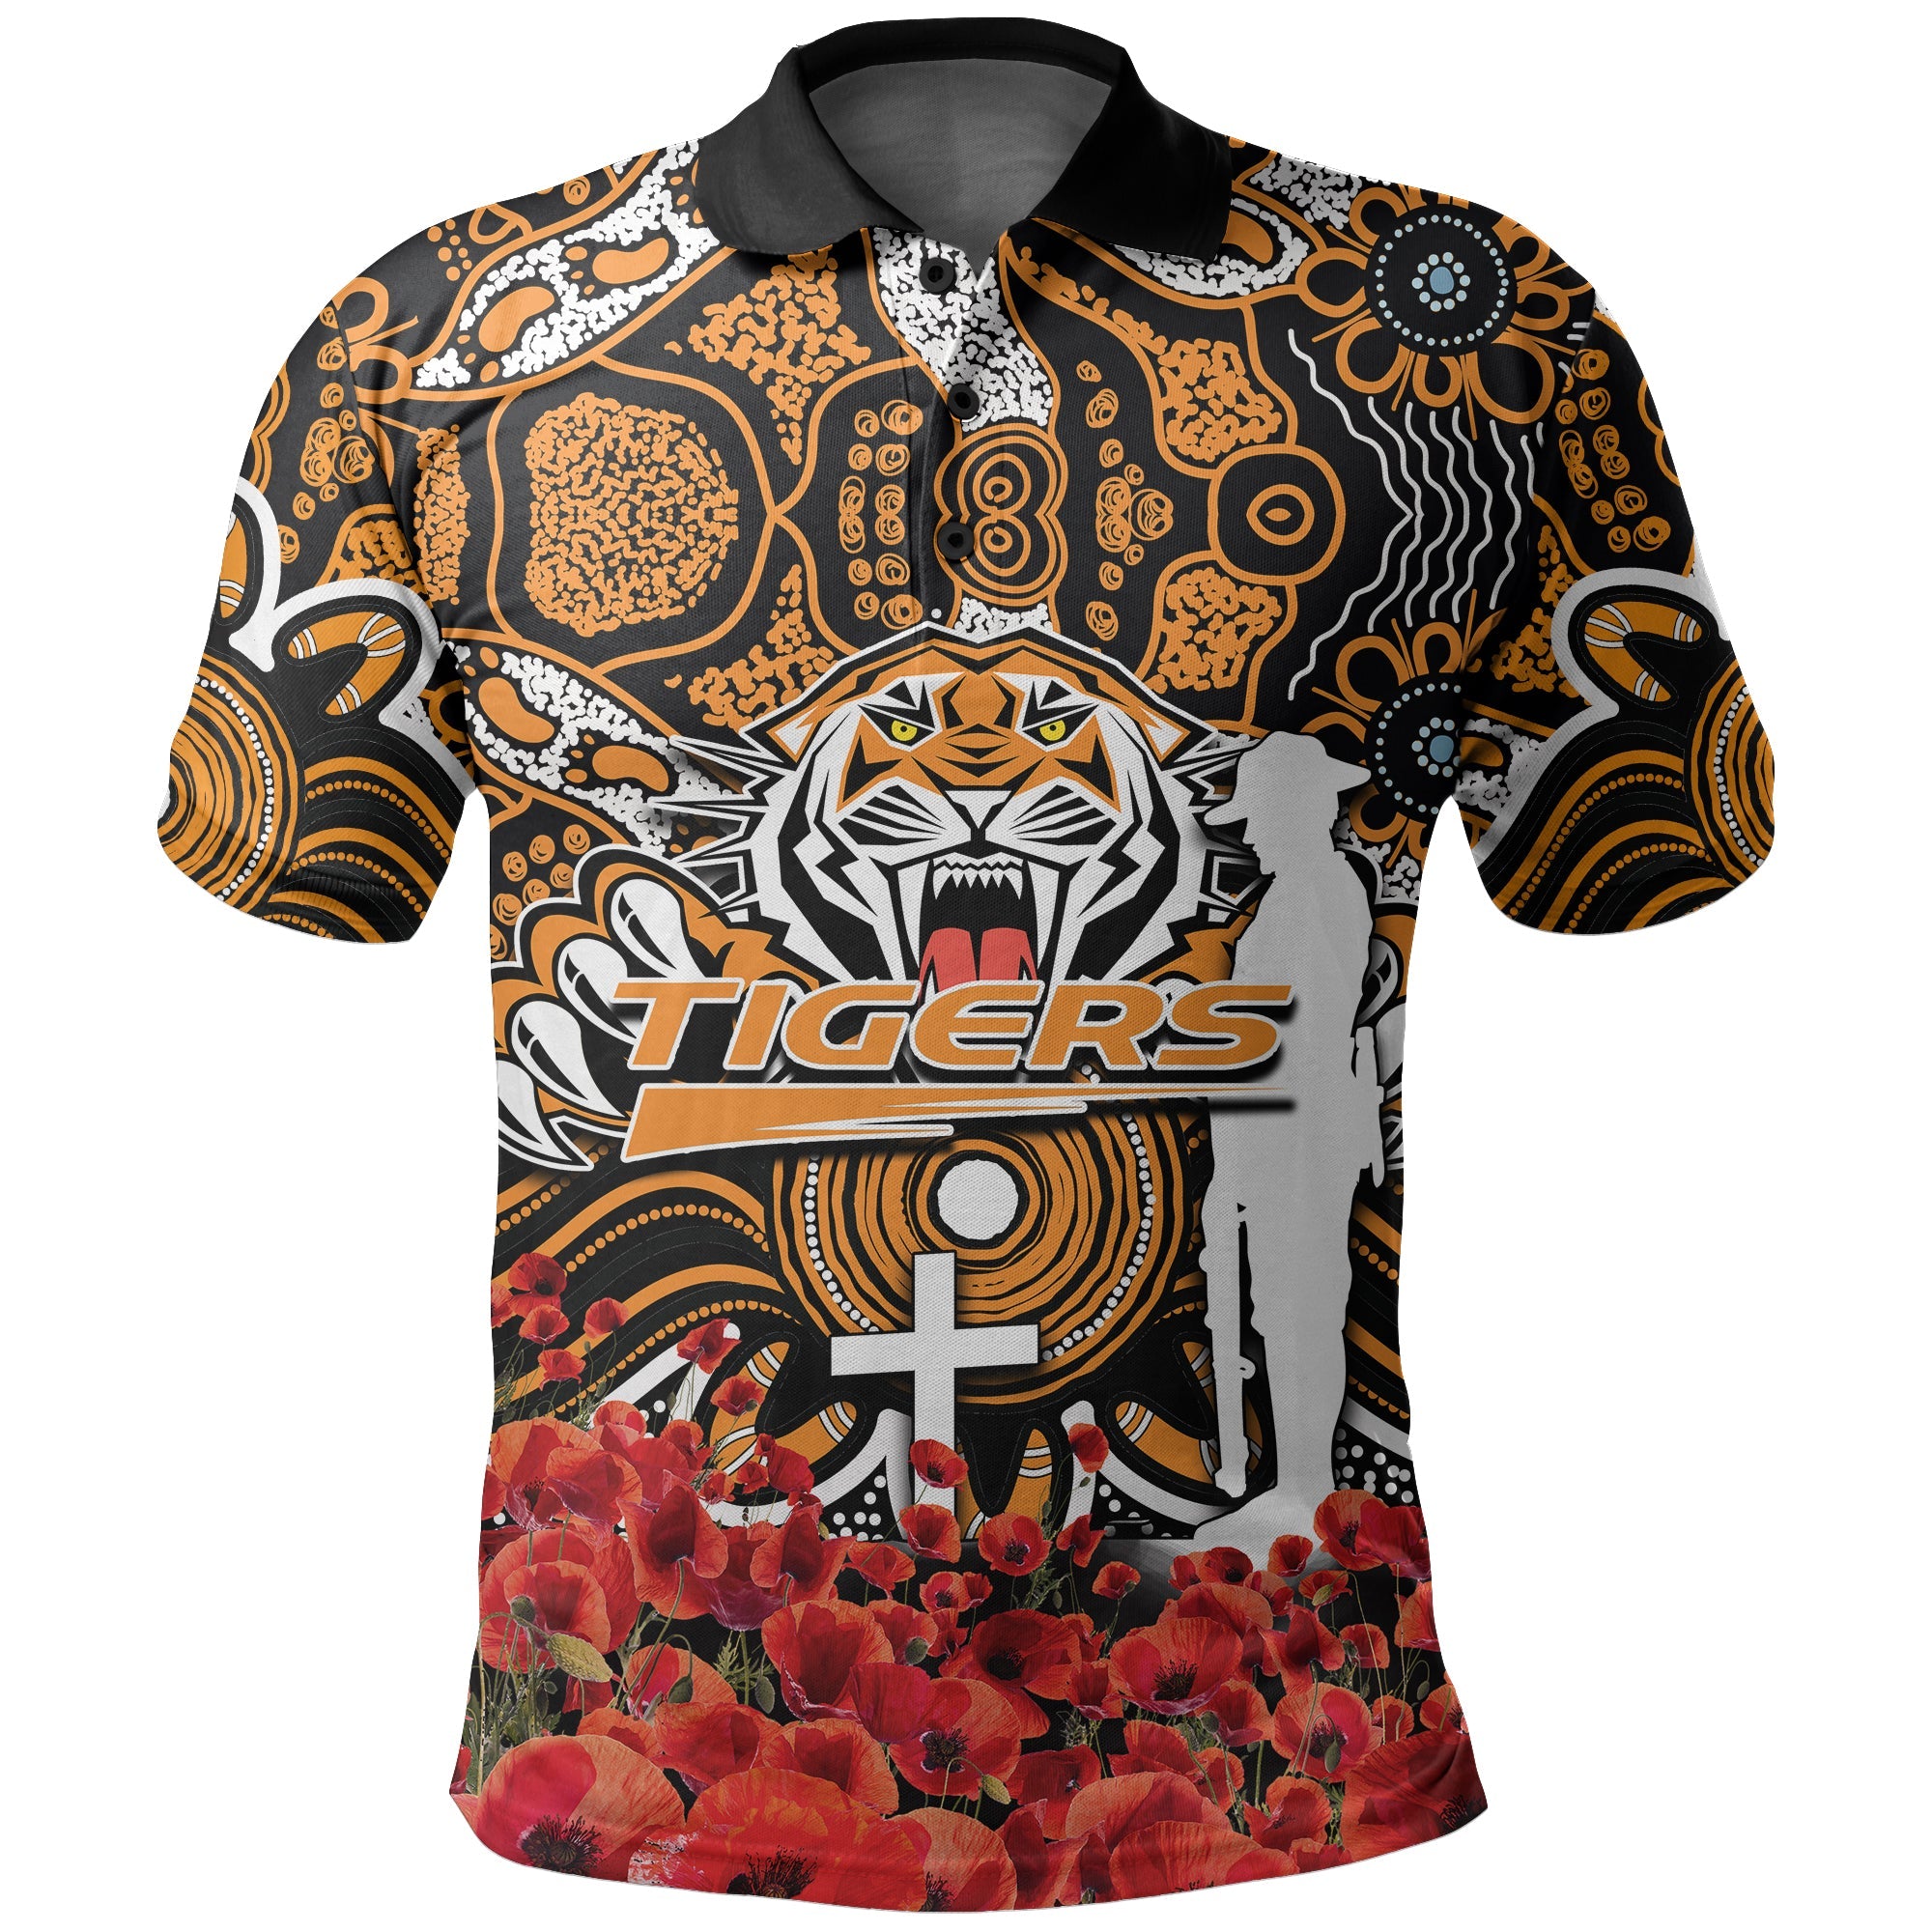 wests-tigers-polo-shirt-anzac-day-poppy-flowers-with-aboriginal